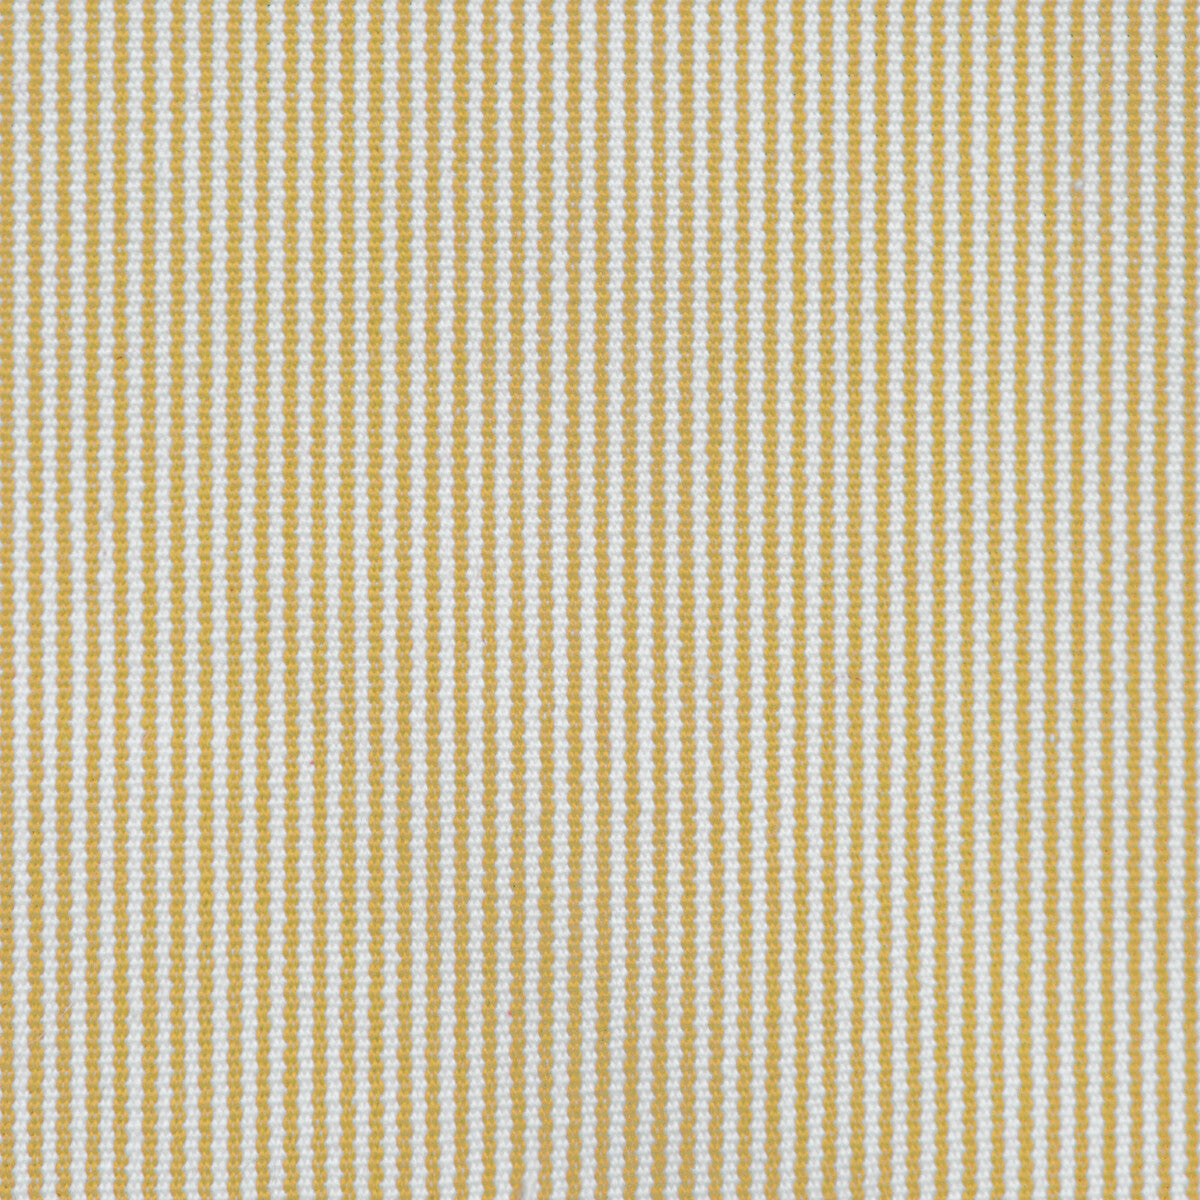 Talaiot fabric in ocre/blanco color - pattern GDT5672.001.0 - by Gaston y Daniela in the Gaston Maiorica collection